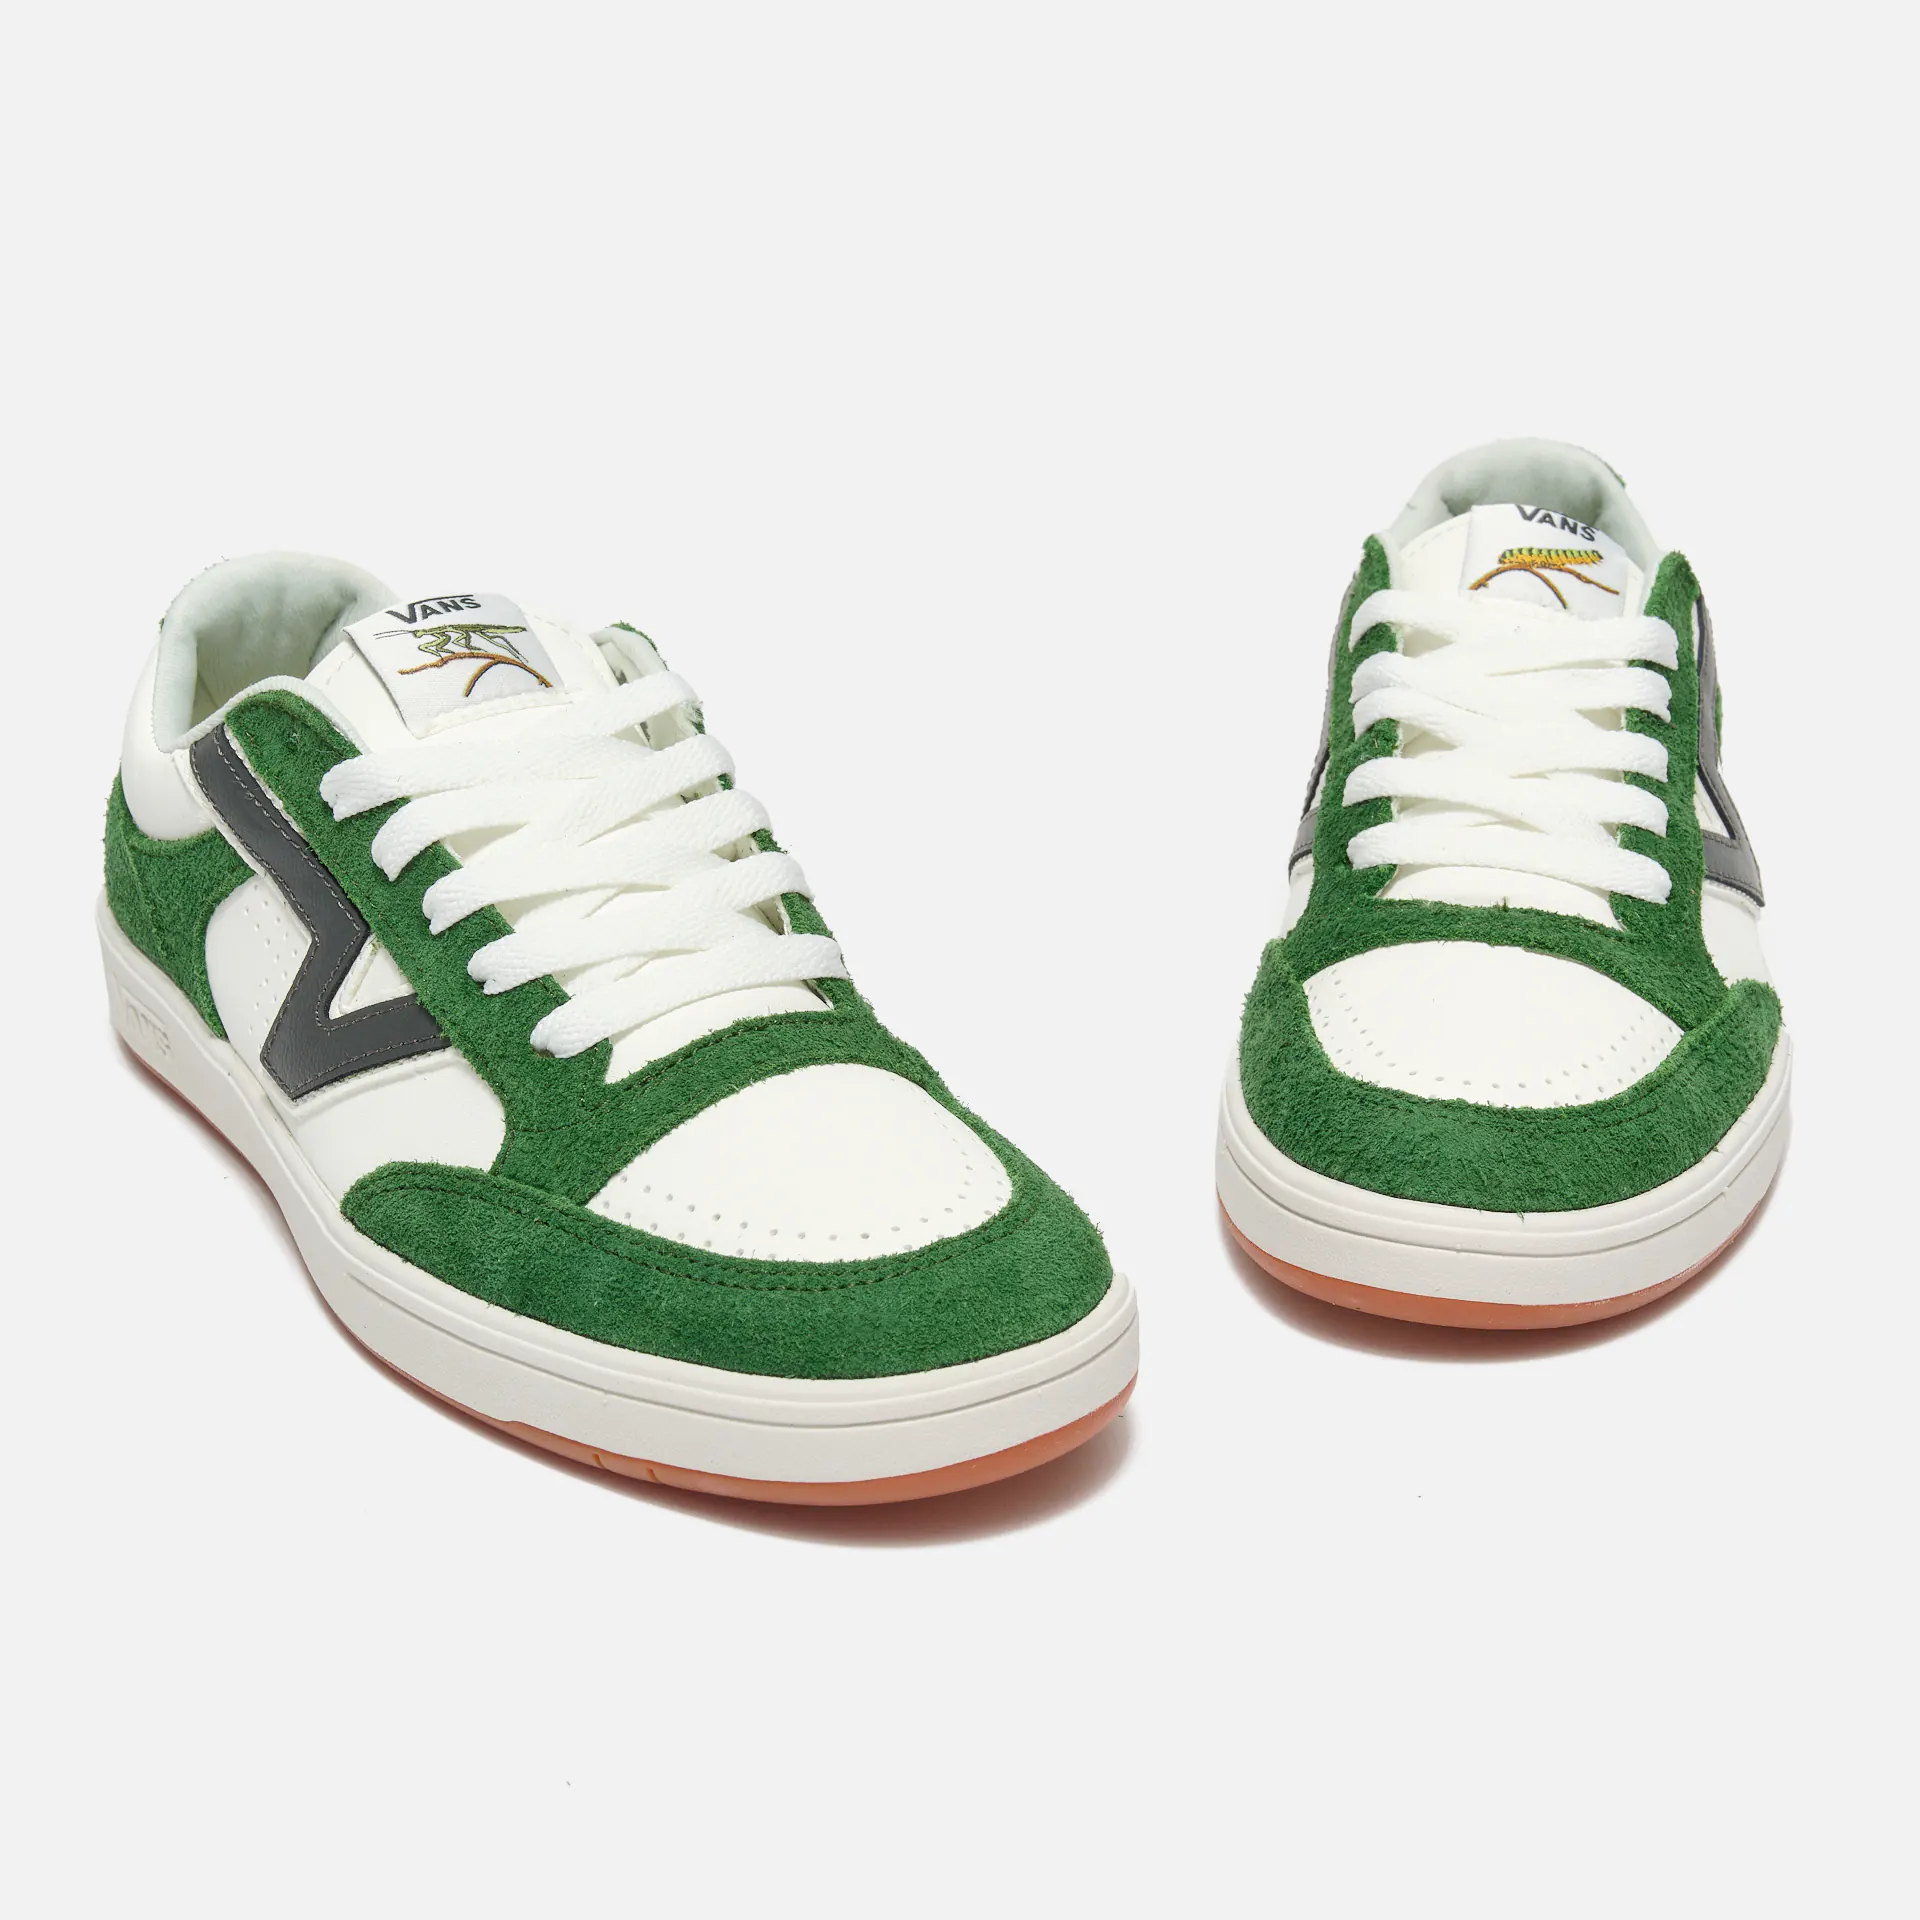 Vans Lowland Sneakers CC Greenhouse Green/White